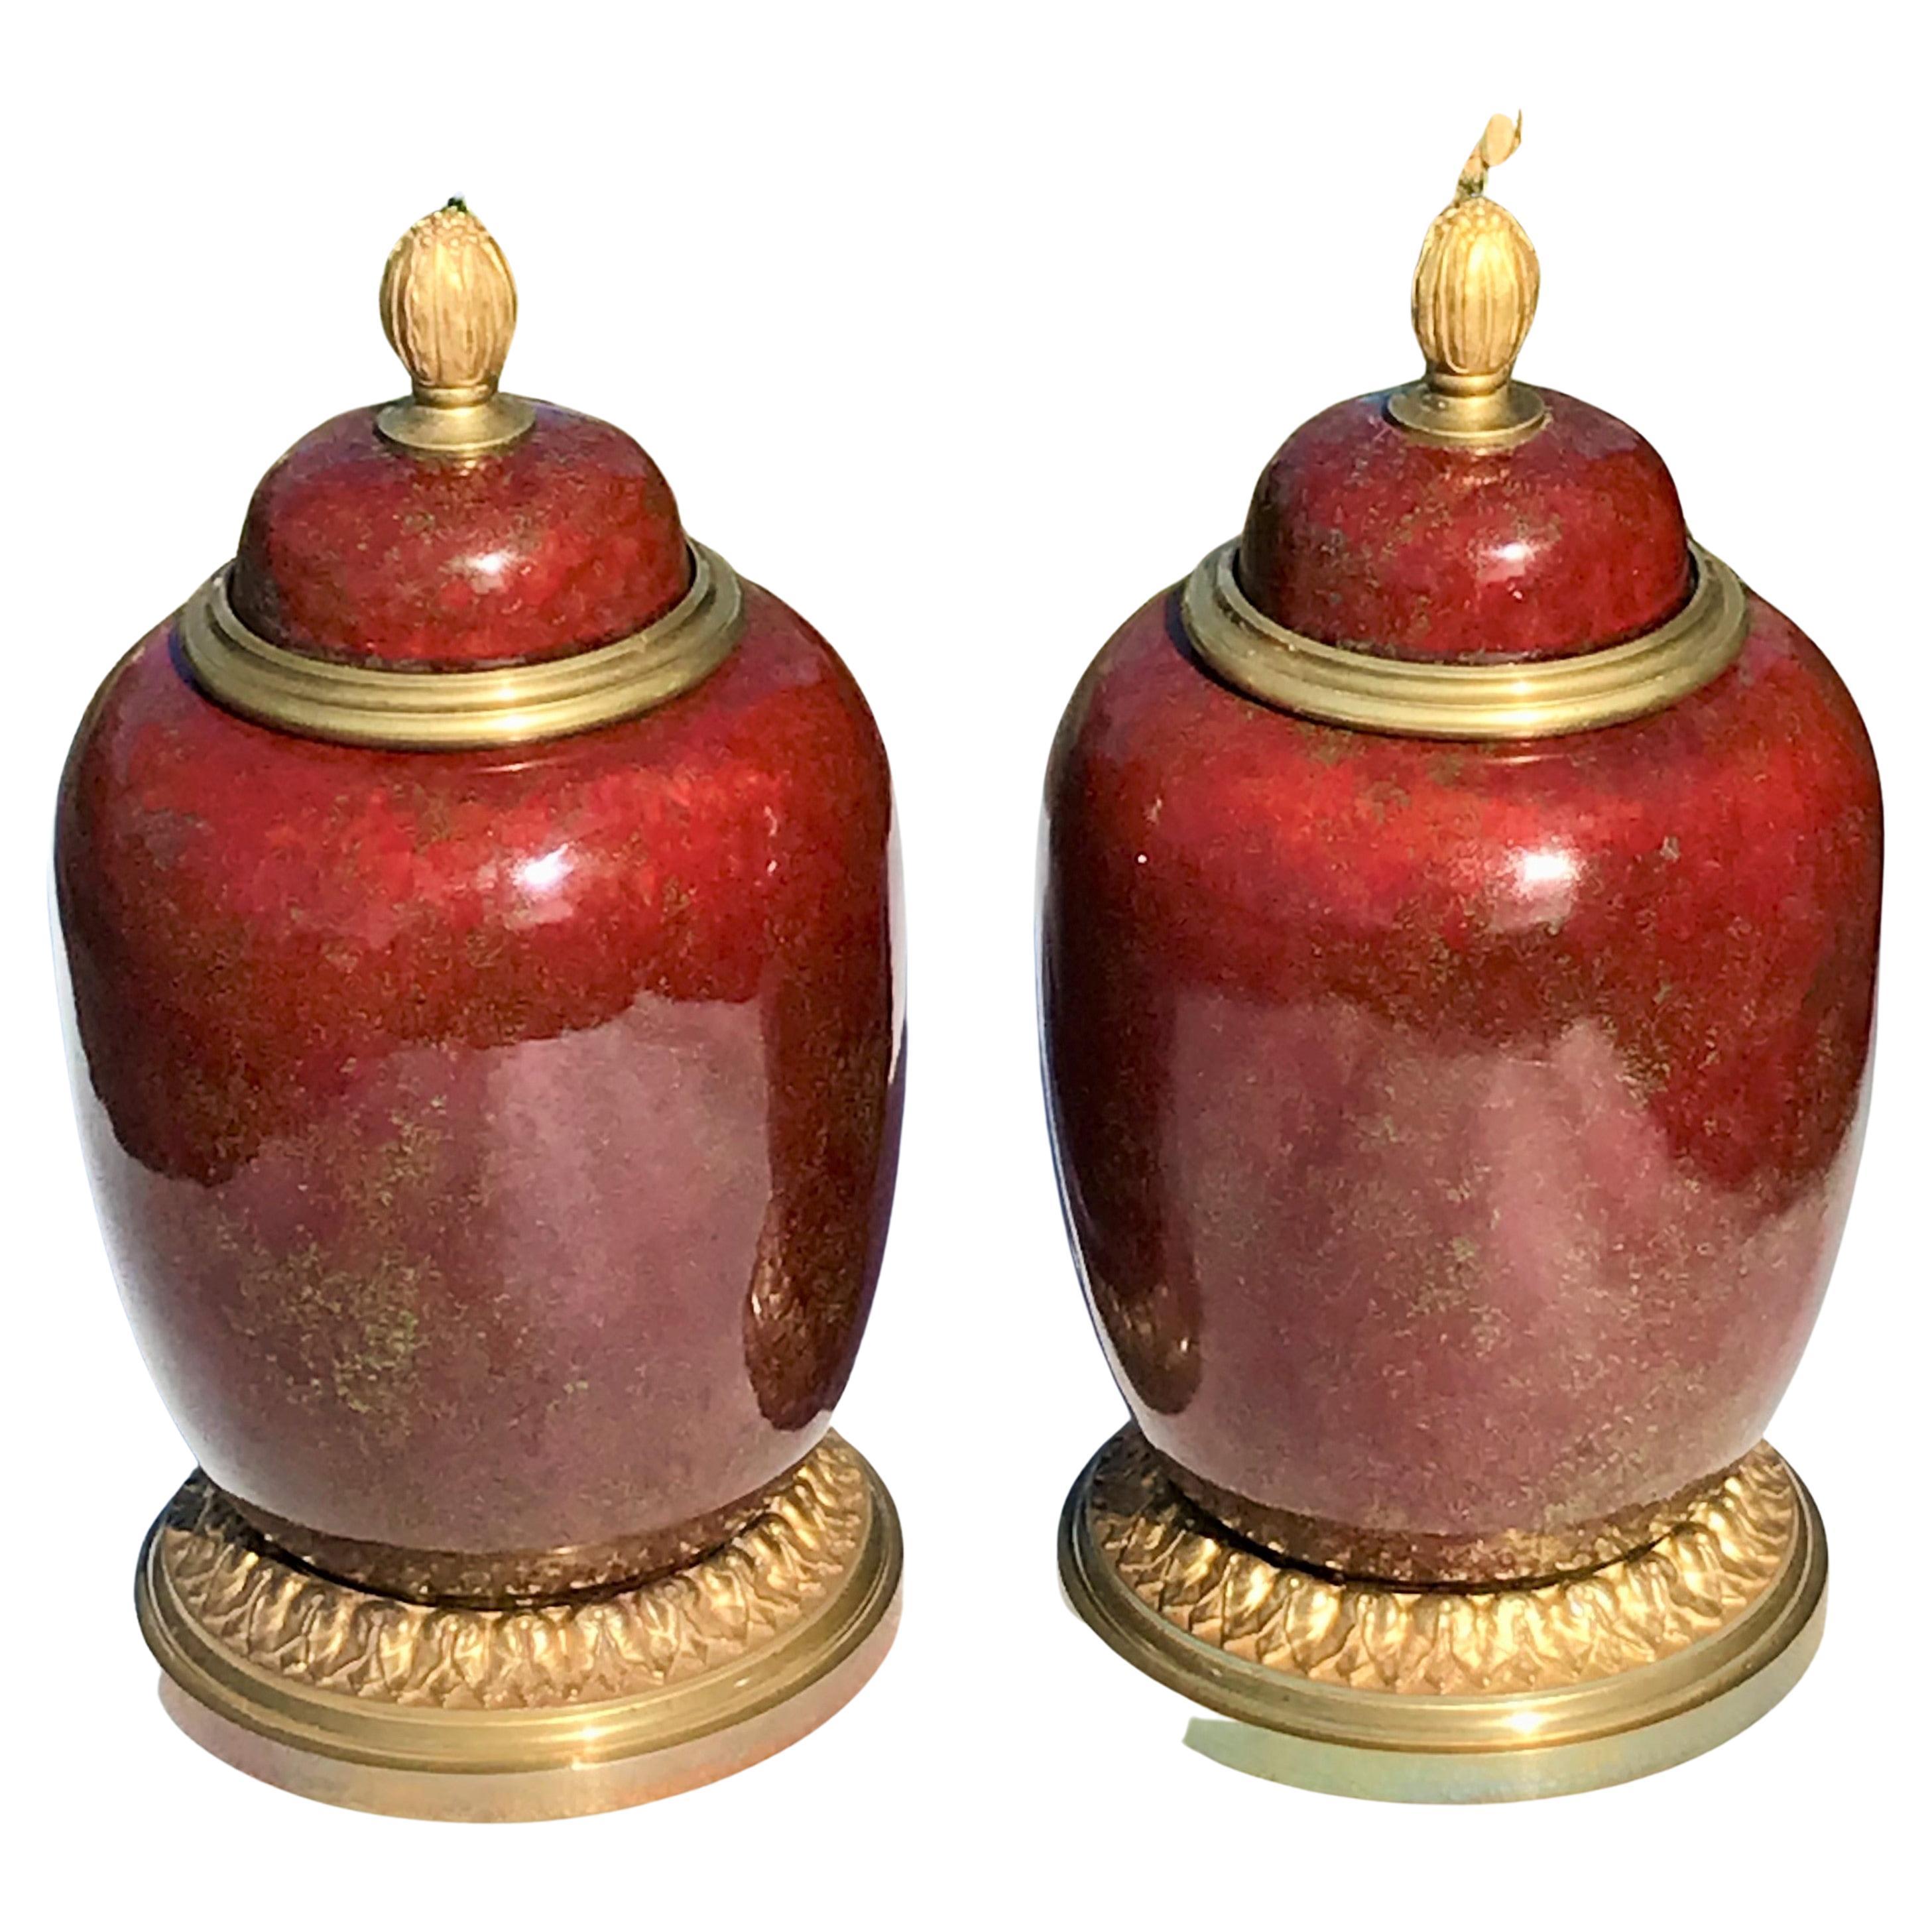 A gilt bronze mounted pair of flambé' porcelain jars or urns. The oxblood color with flecks of gold and chartreuse. In brighter lighting the the color becomes a brilliant ruby. Both present very well. Can be used with or without the bronze lid